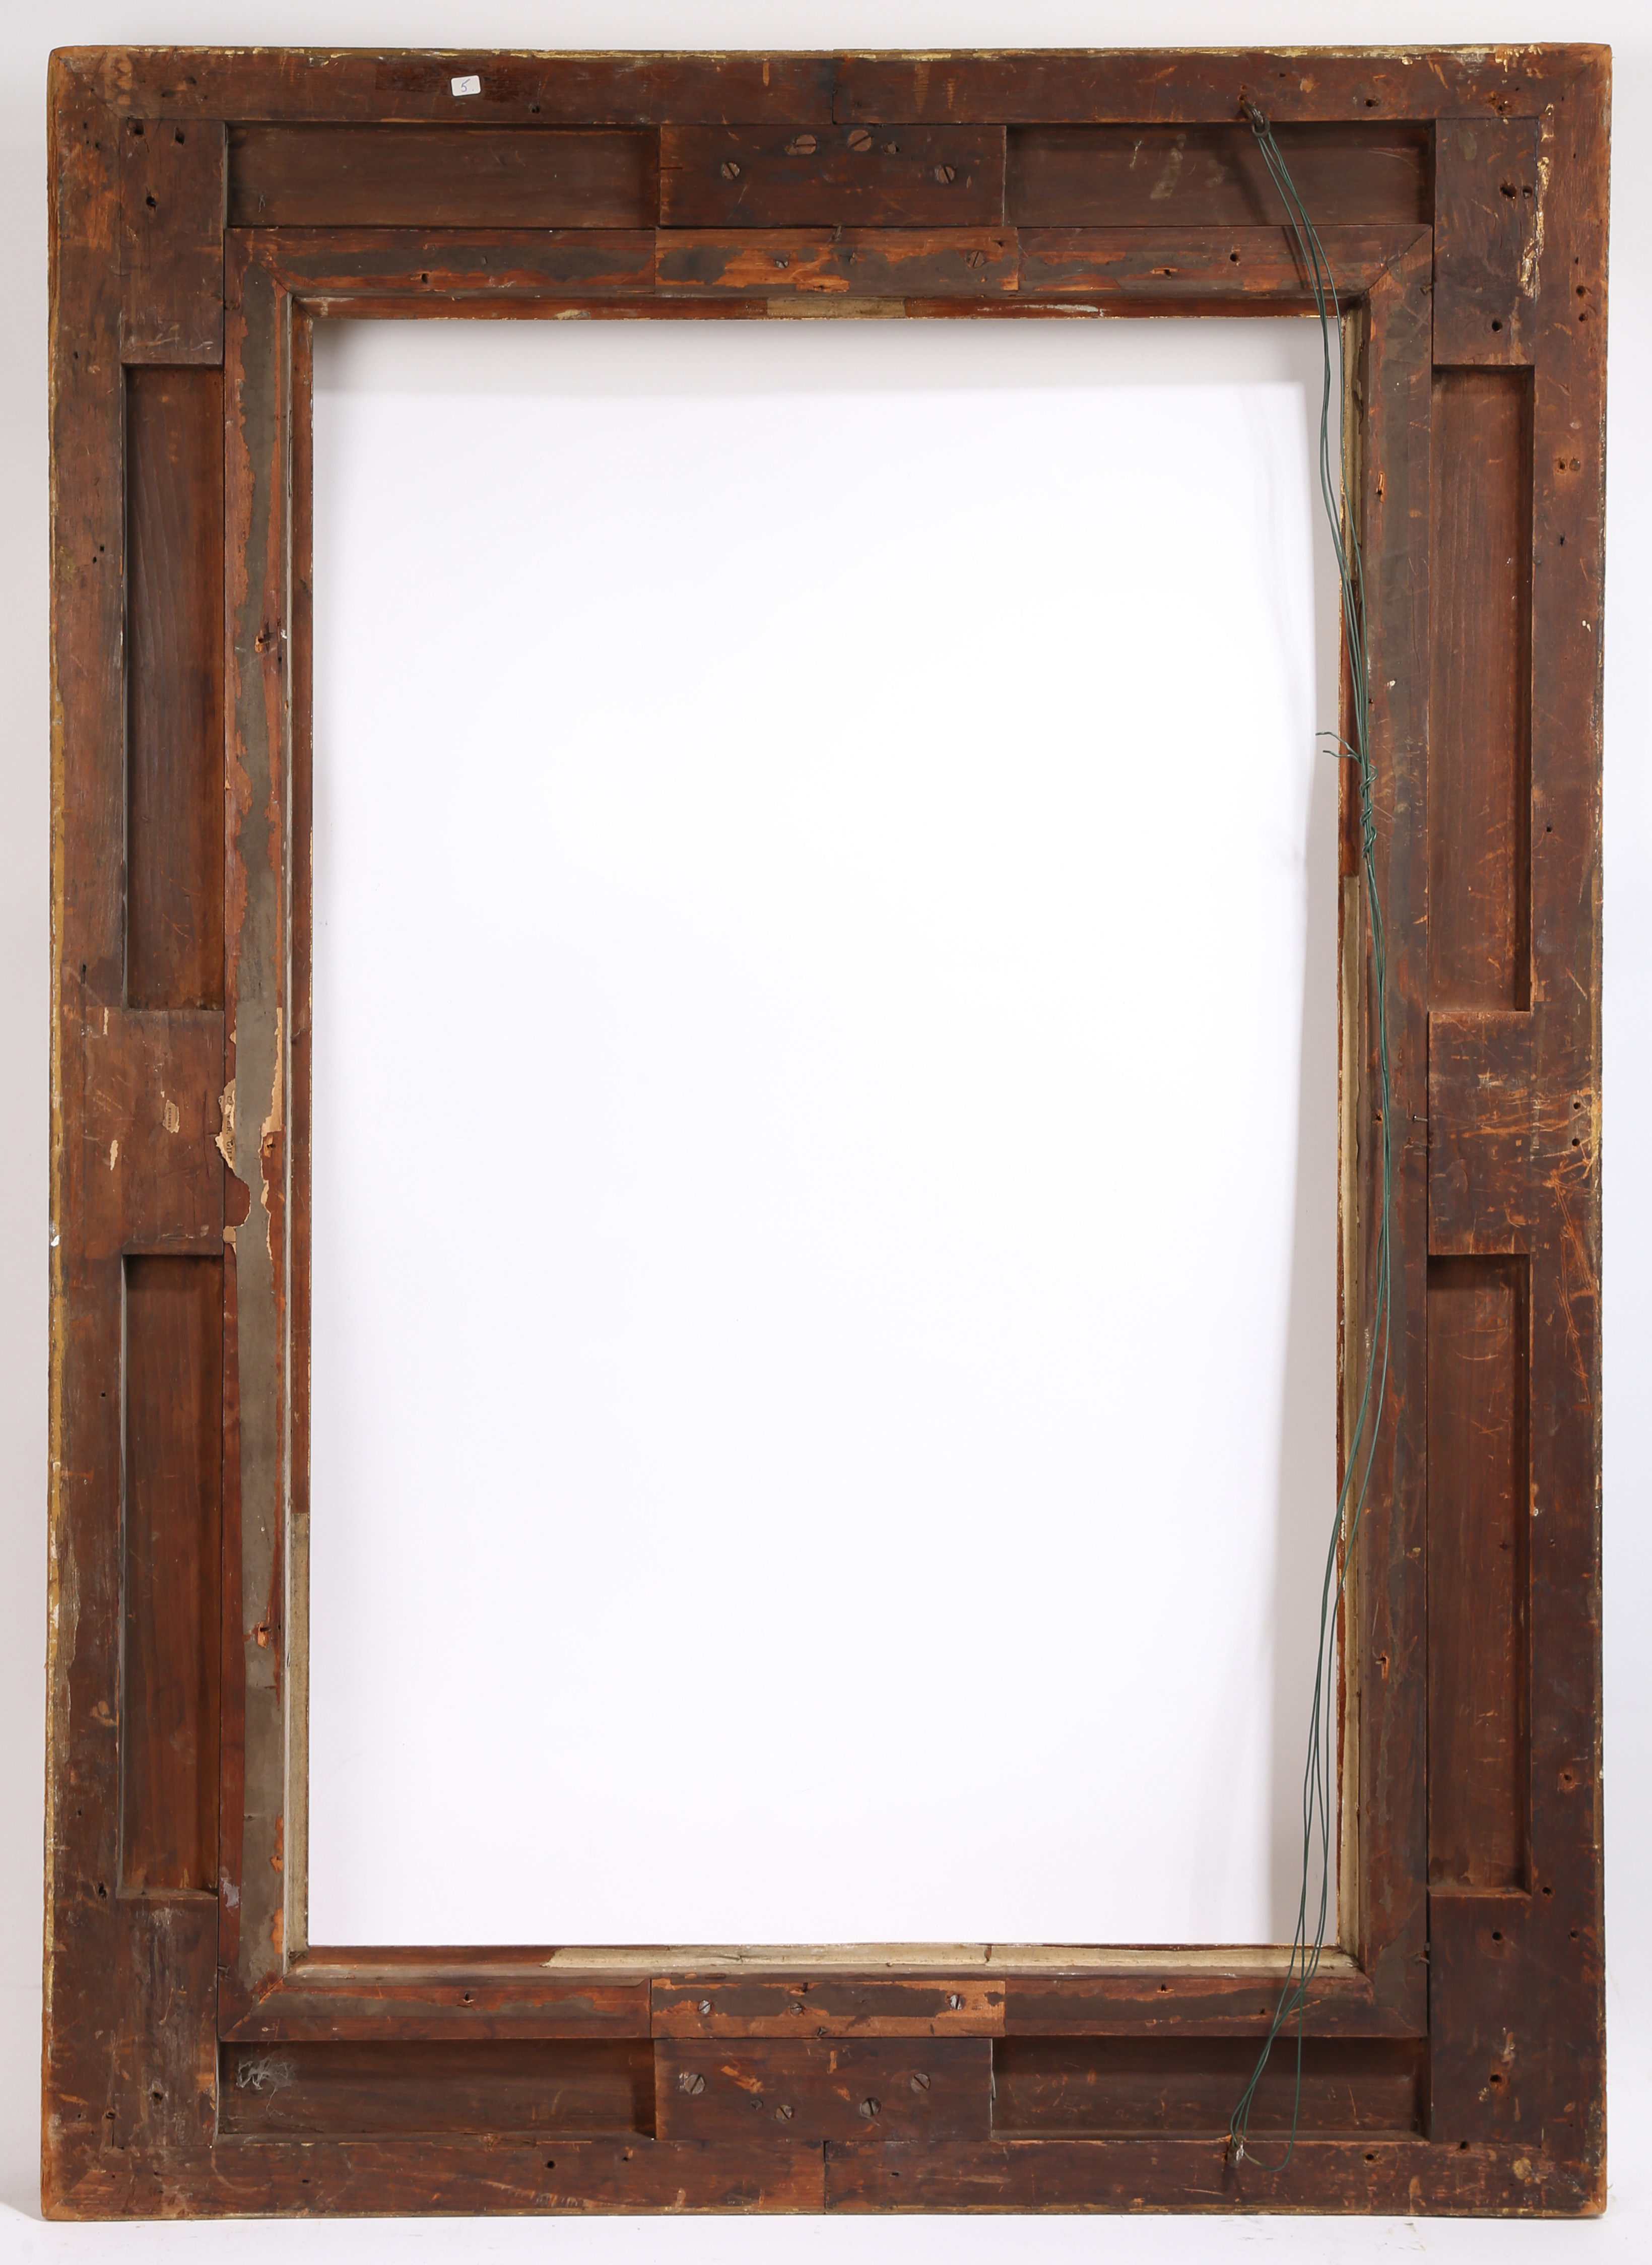 19th century English pattern picture frame with intricate centres and corners - rebate size 22in x - Image 2 of 3